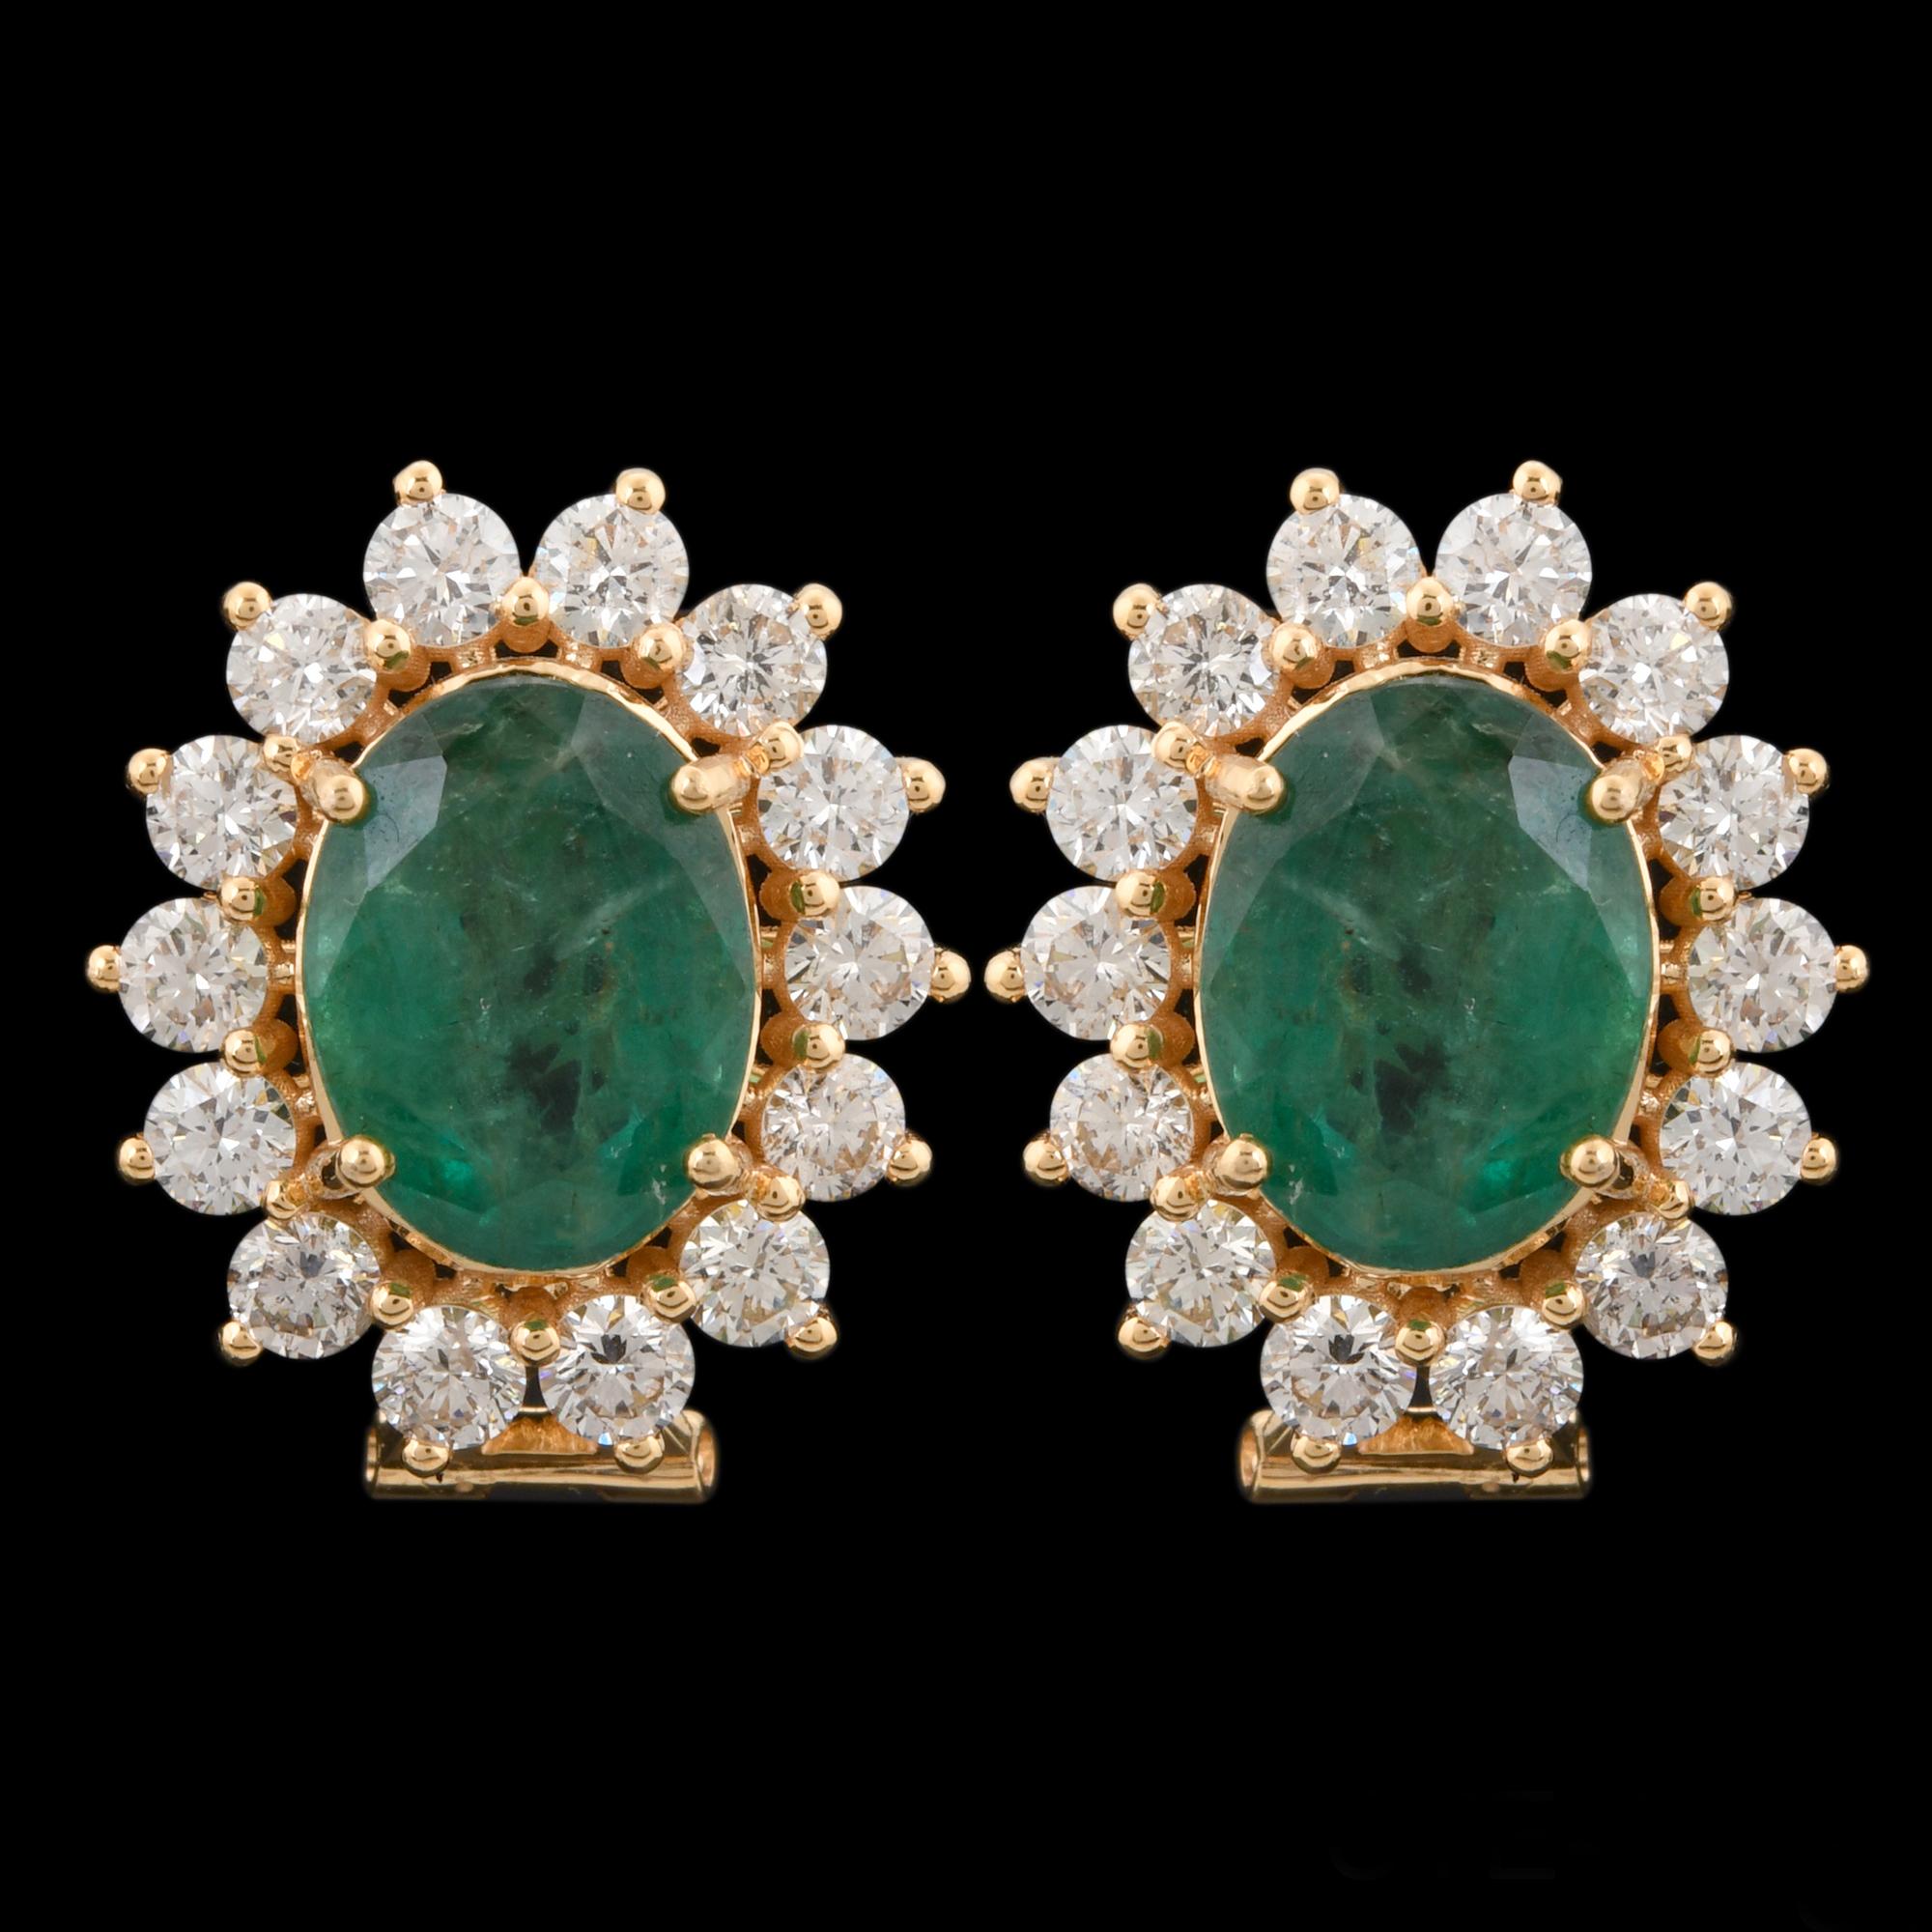 Modern Natural Emerald Gemstone Stud Earrings Solid 10k Yellow Gold Diamond Jewelry For Sale